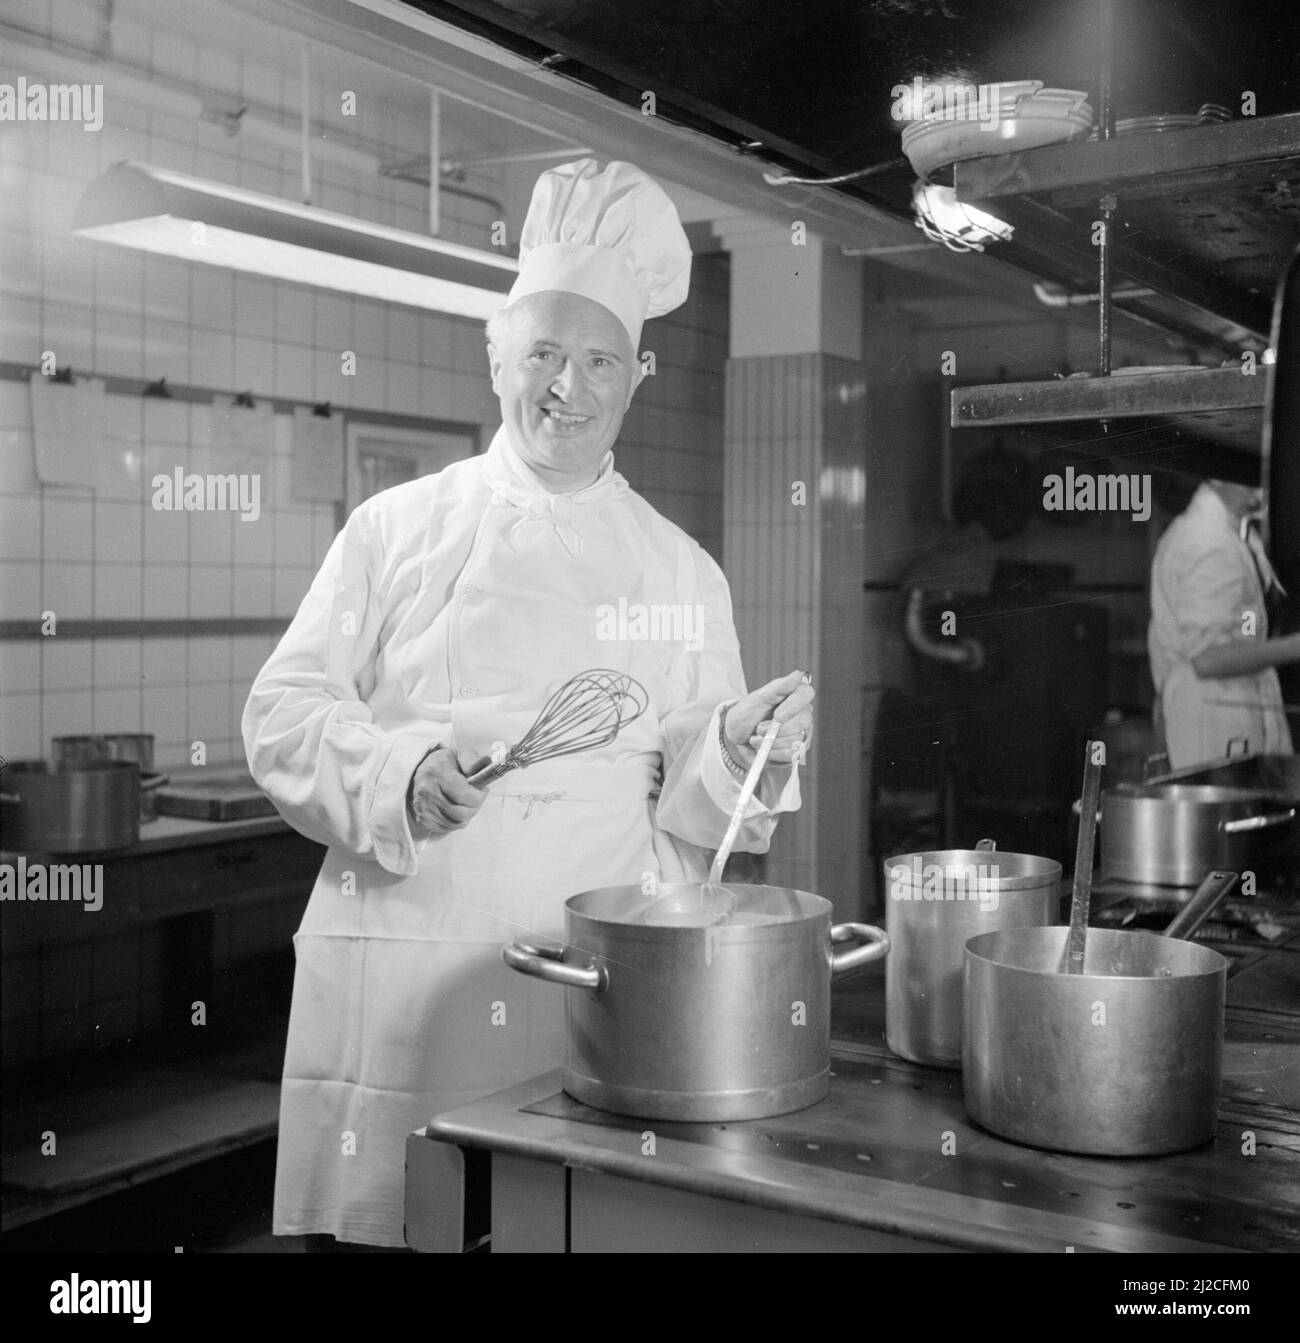 1950s chef cooking food in a large kitchen ca: June 26, 1954 Stock Photo